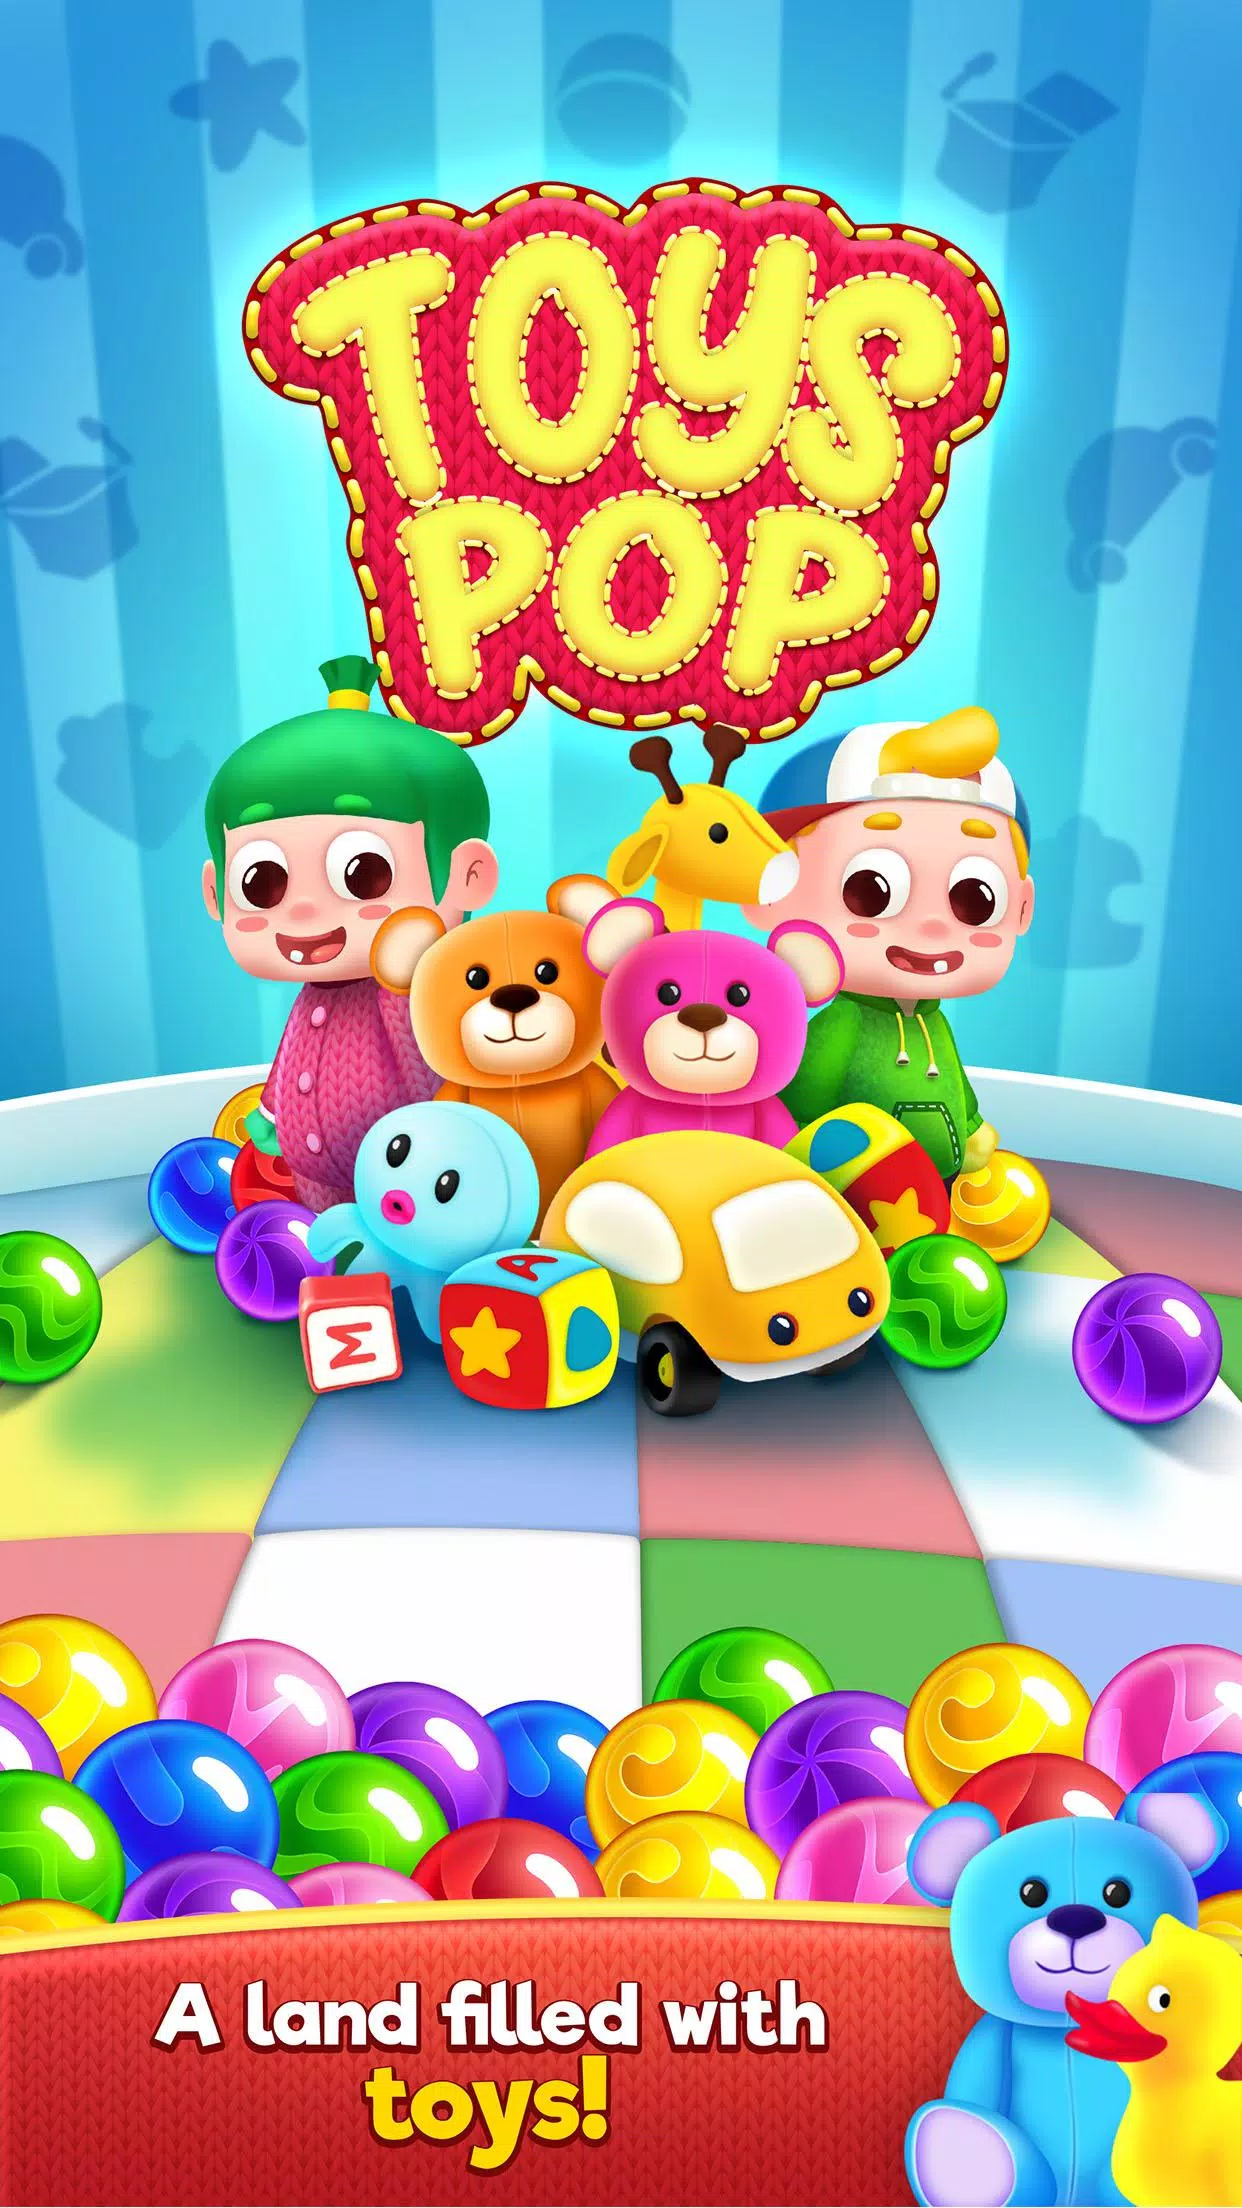 Bubble Shooter Classic Game! by MadOverGames